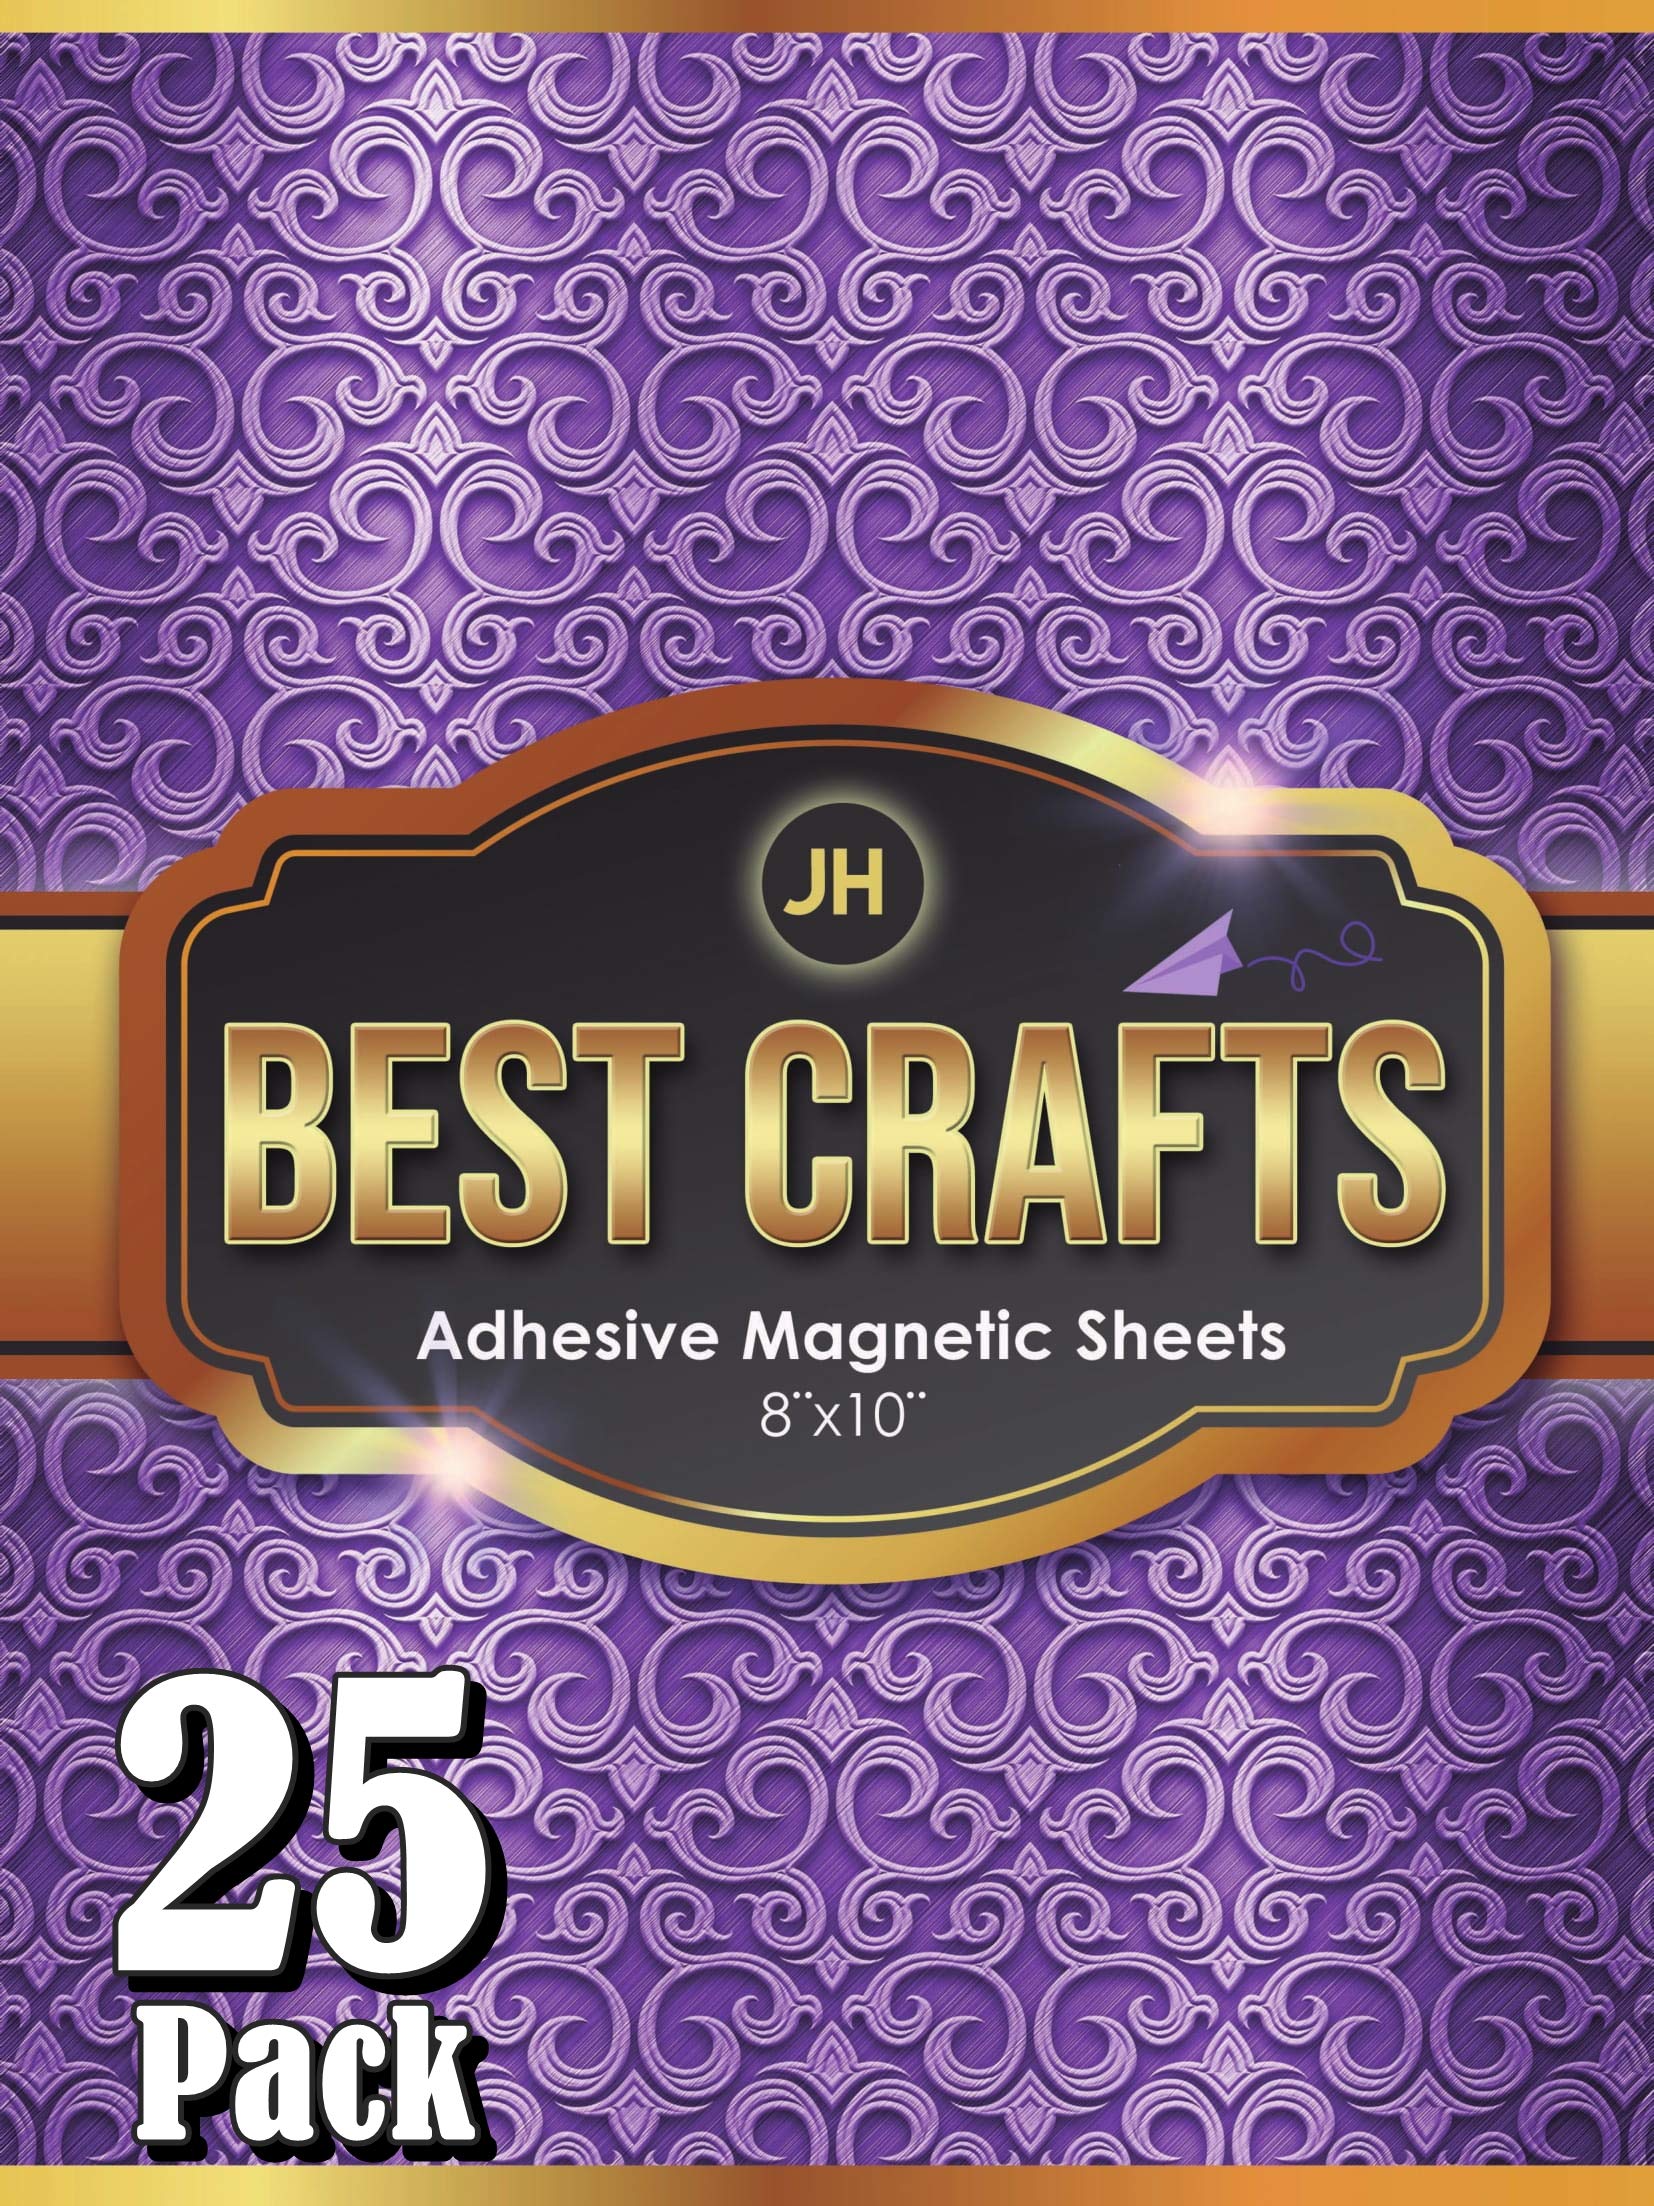 JH Best Crafts Adhesive Magnetic Sheets